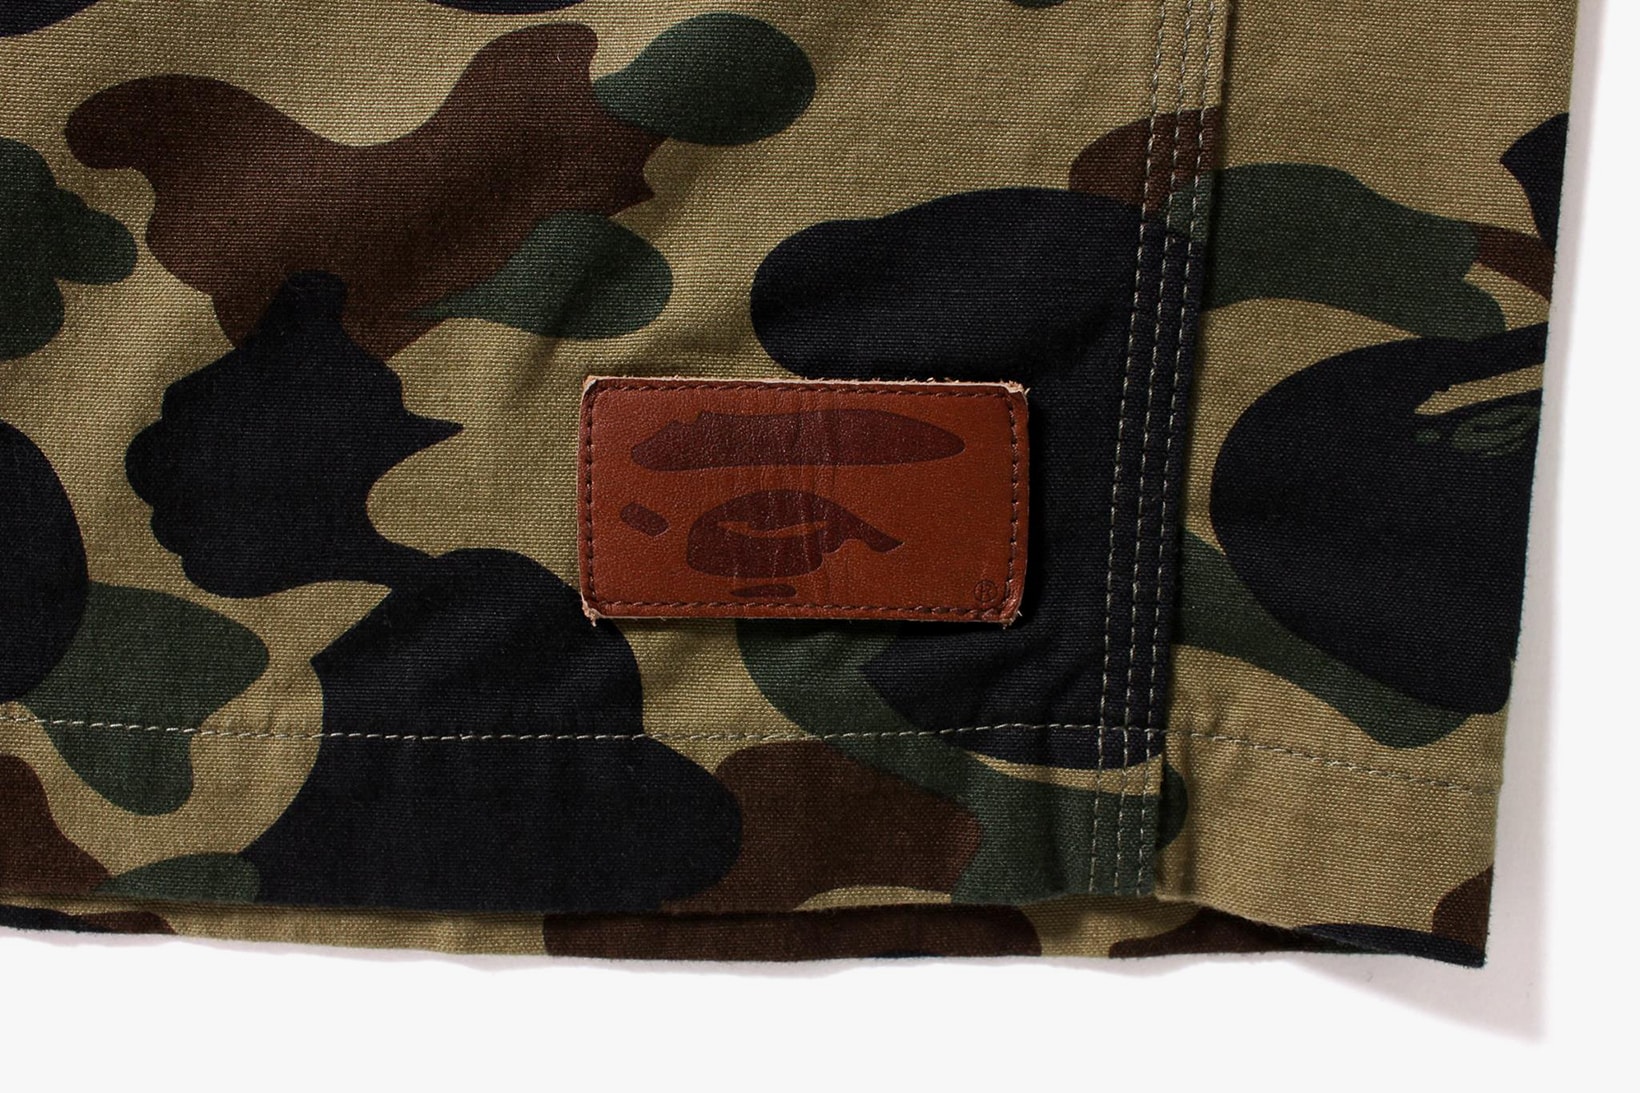 BAPE Duck 1ST CAMO Hat & Coverall Jacket Release | Hypebeast